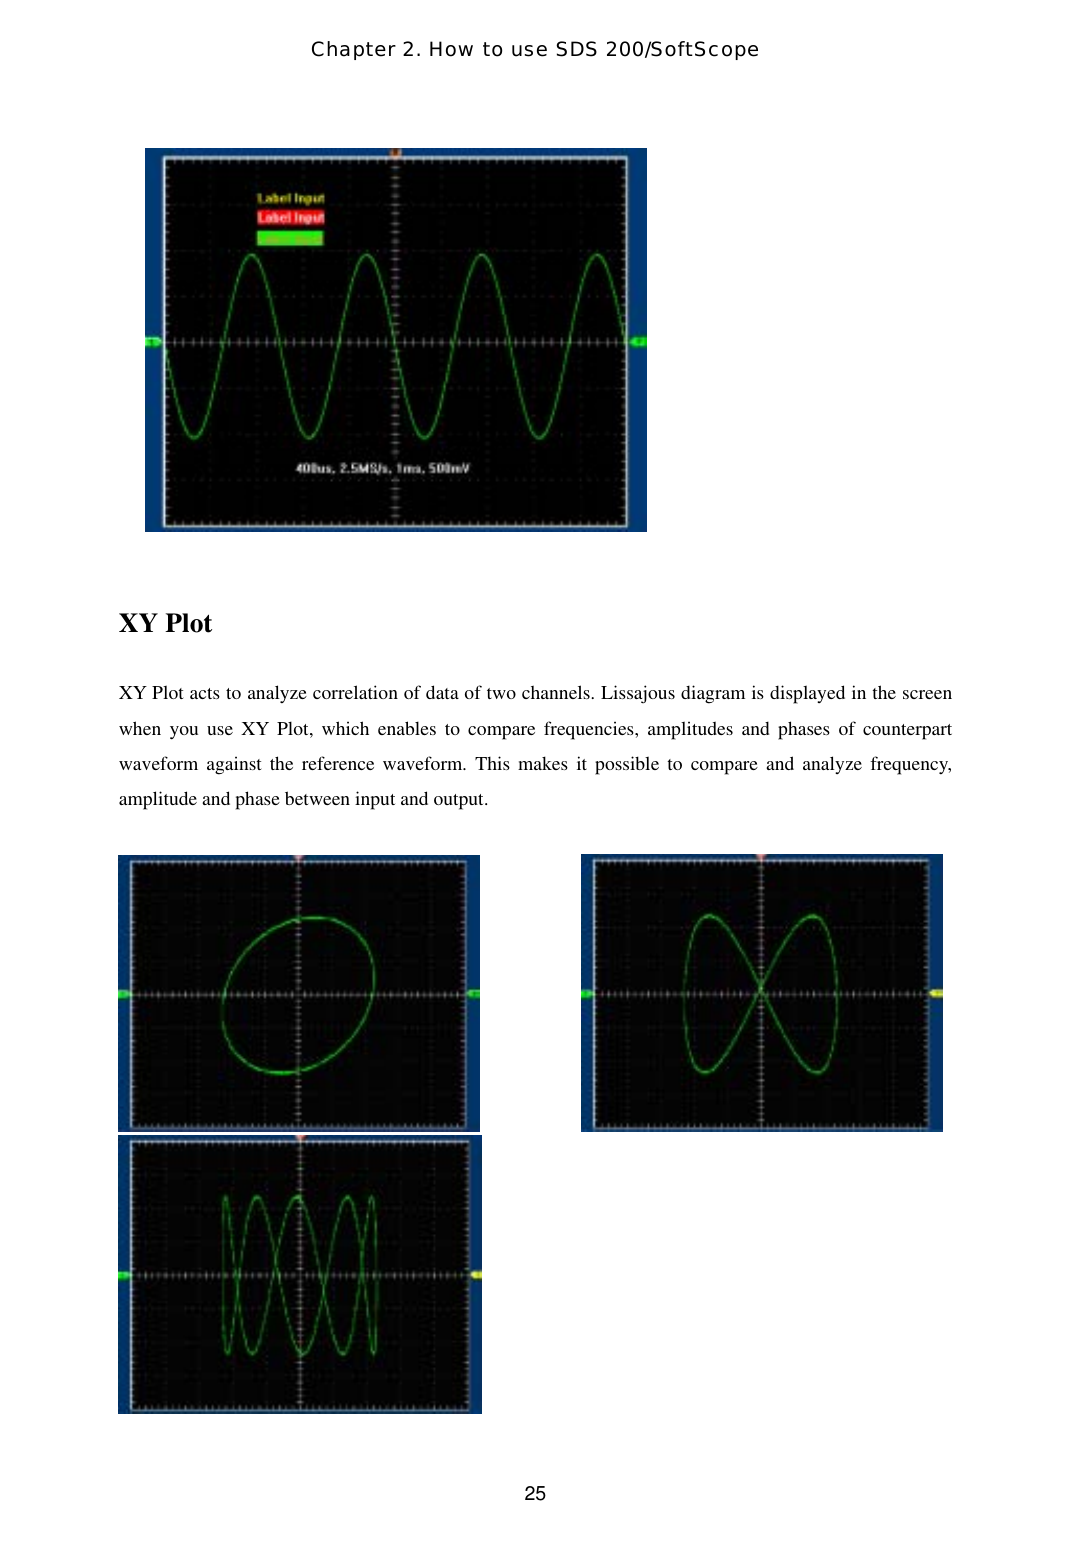 Chapter 2. How to use SDS 200/SoftScope  25   XY Plot  XY Plot acts to analyze correlation of data of two channels. Lissajous diagram is displayed in the screen when you use XY Plot, which enables to compare frequencies, amplitudes and phases of counterpart waveform against the reference waveform. This makes it possible to compare and analyze frequency, amplitude and phase between input and output.                    